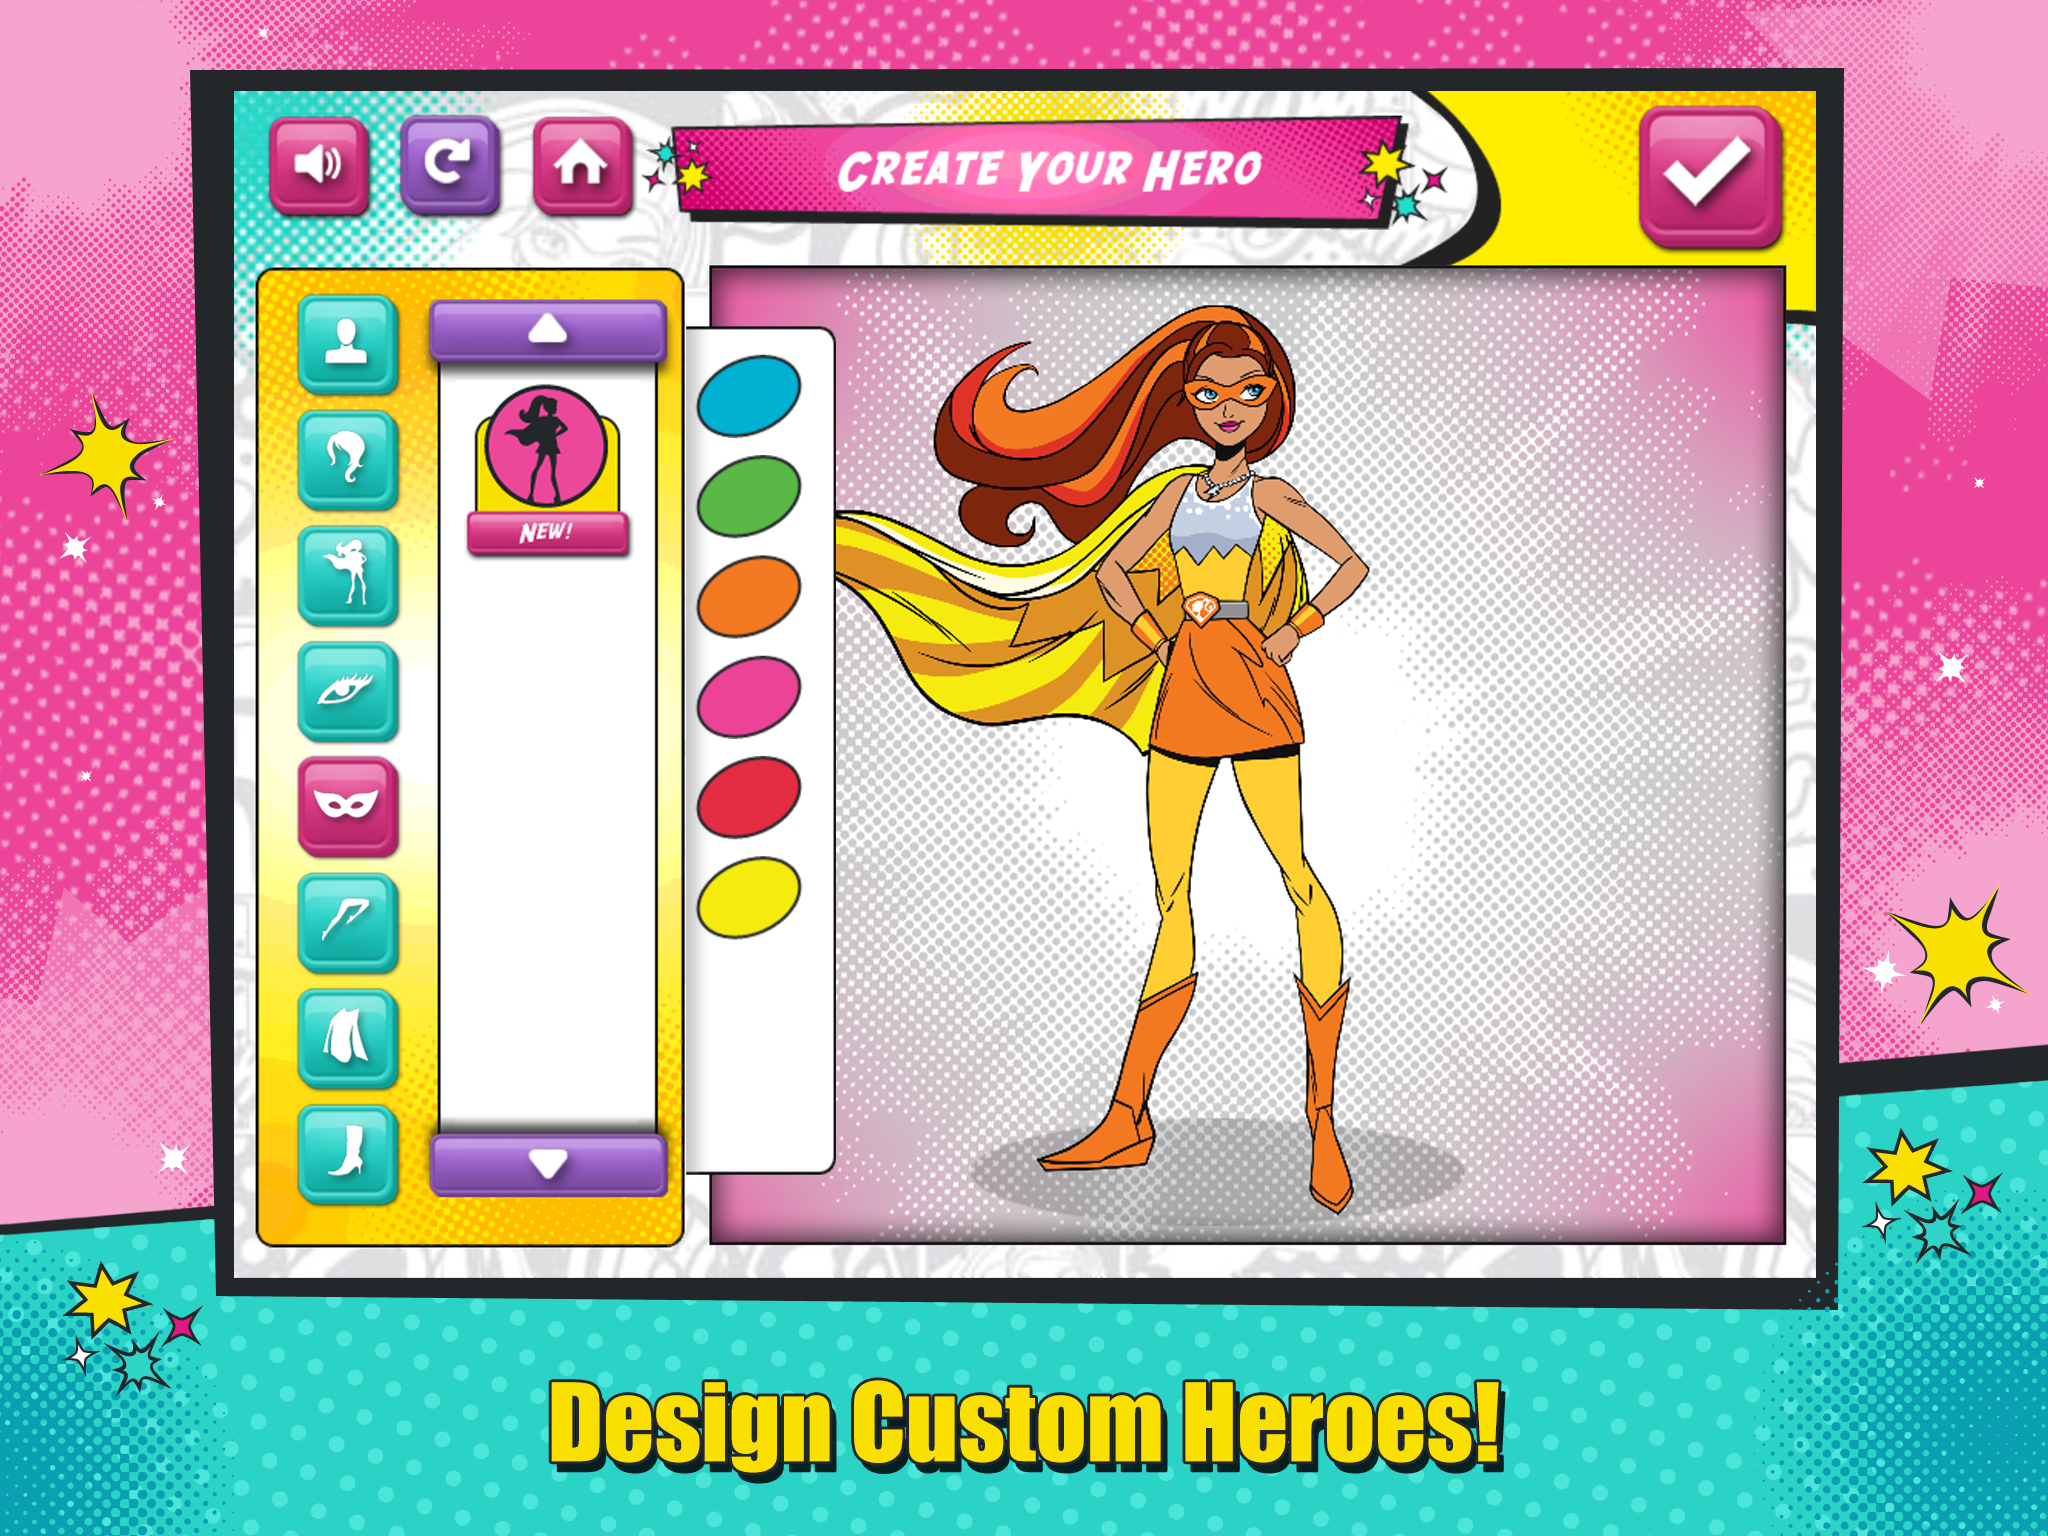 Barbie® Comic Maker APK 1.0 for Android – Download Barbie® Comic Maker XAPK  (APK + OBB Data) Latest Version from APKFab.com